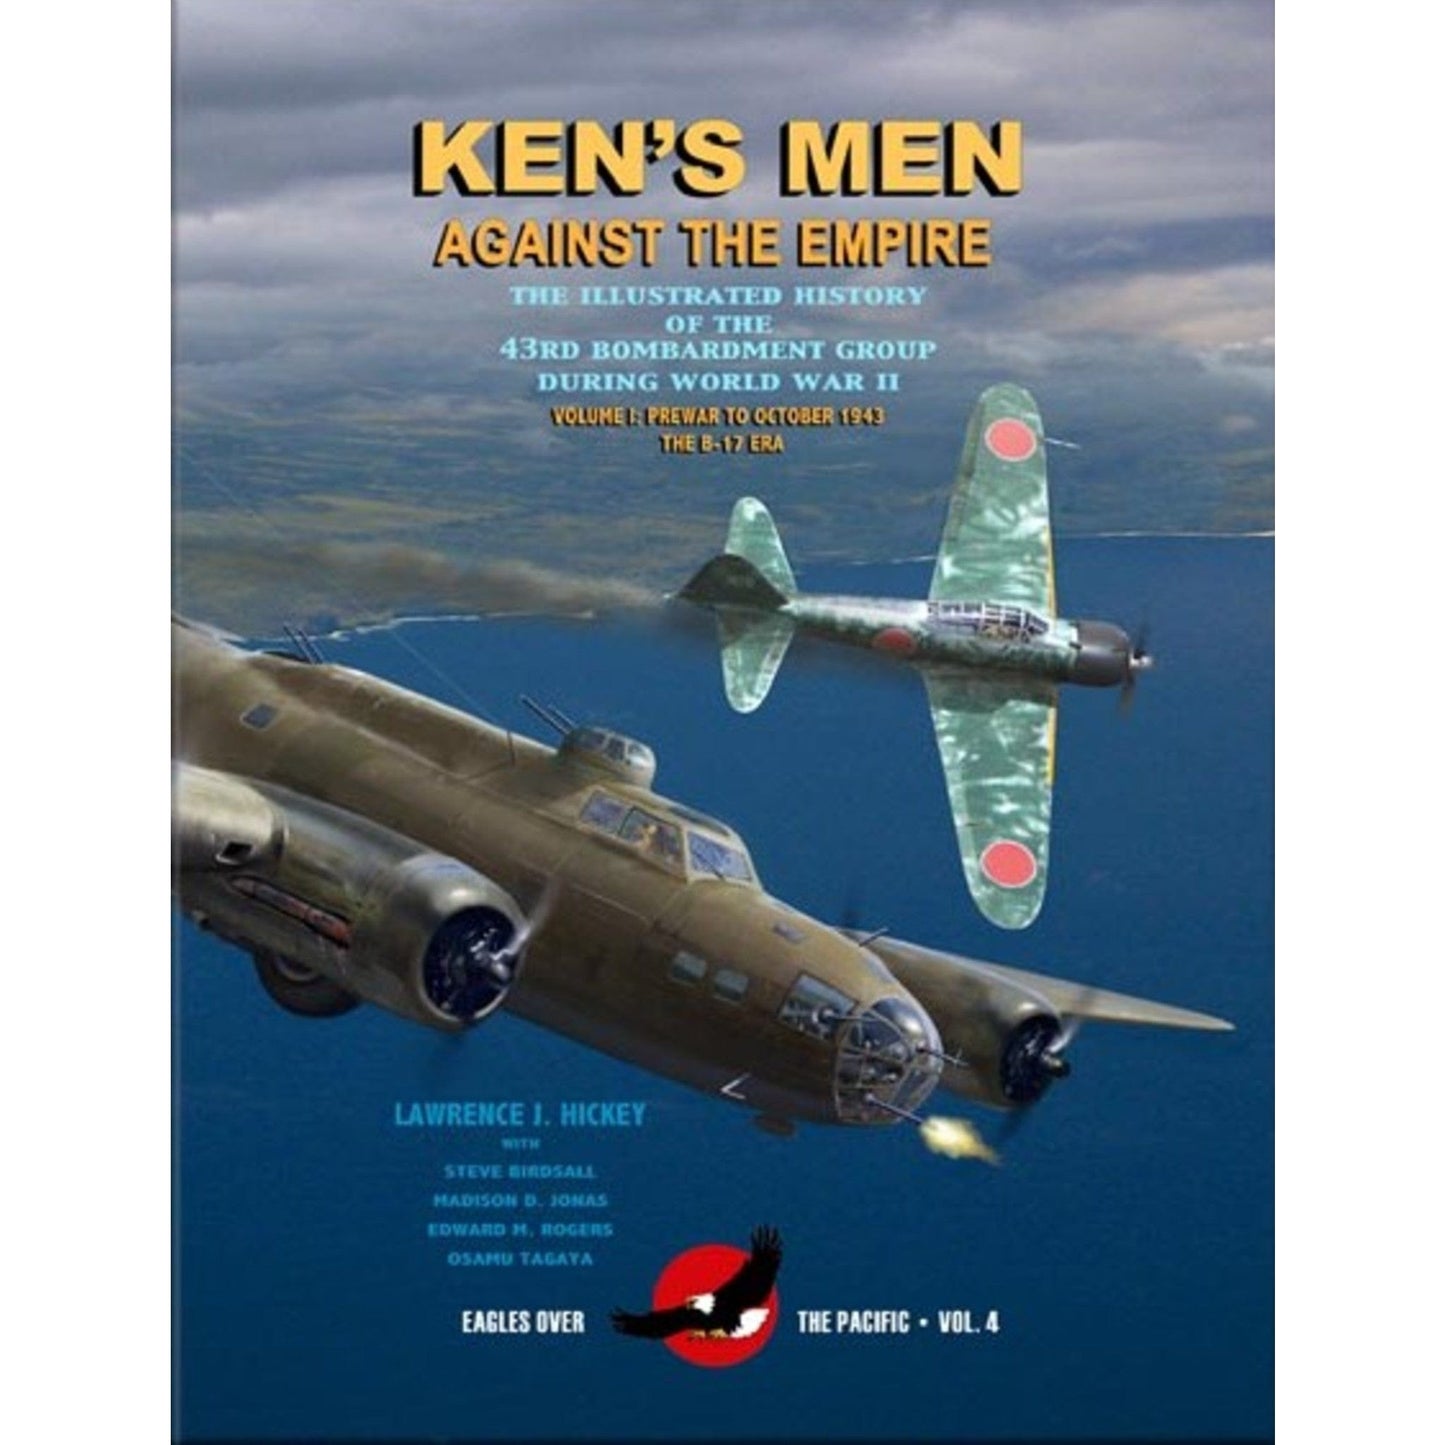 "Ken’s Men Against the Empire Vol. 1" - by author Lawrence J. Hickey from The History List Store